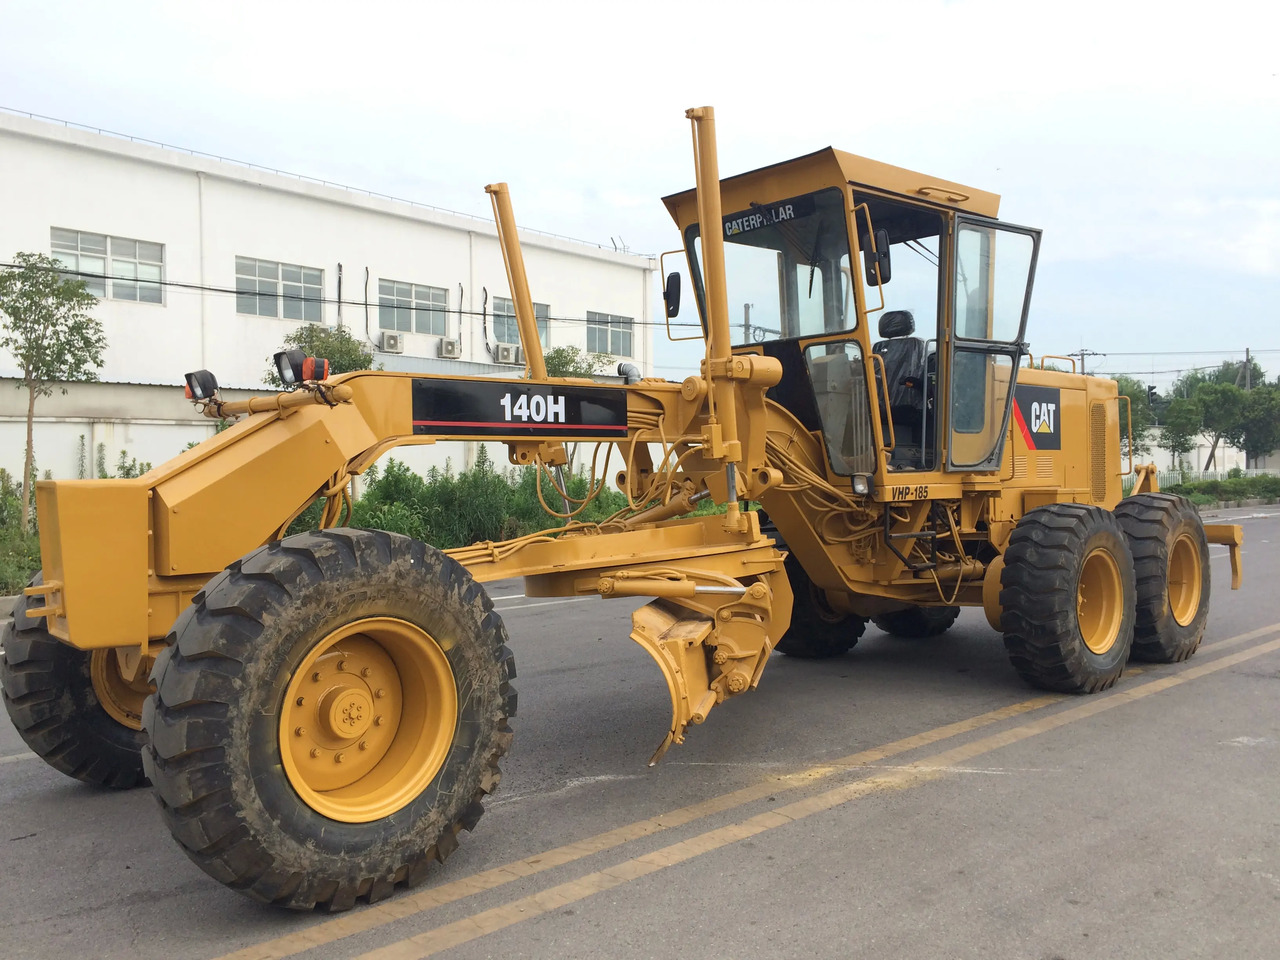 Грейдер Hot sale Used Cat 140H motor grader with good condition,USED heavy equipment used motor grader CAT 140H grader in China: фото 3